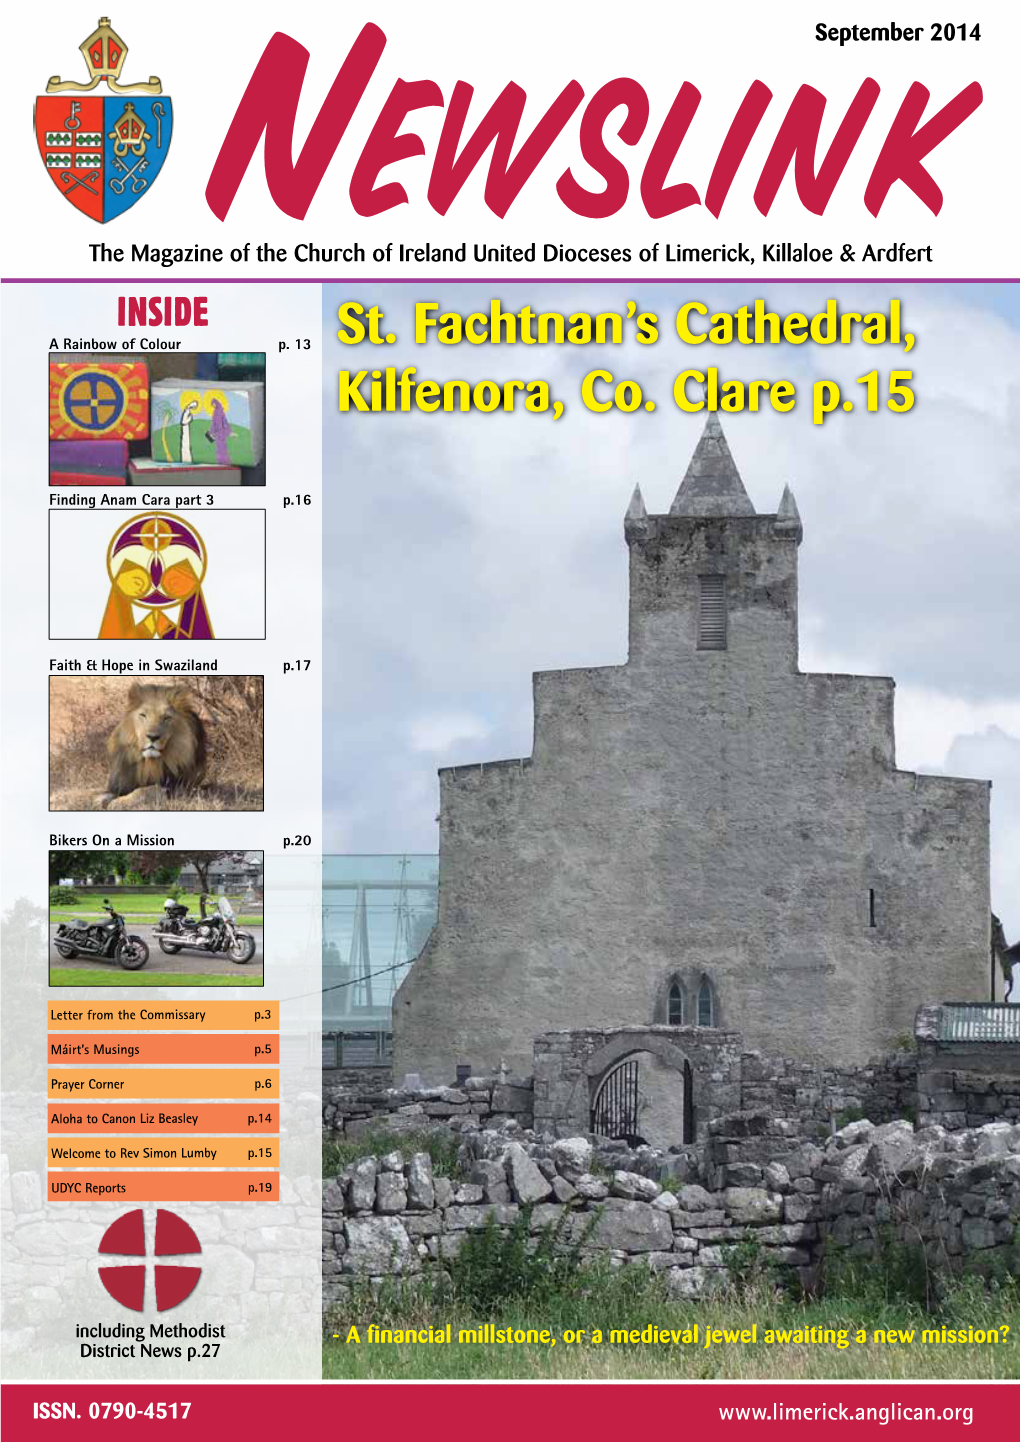 St. Fachtnan's Cathedral, Kilfenora, Co. Clare P.15